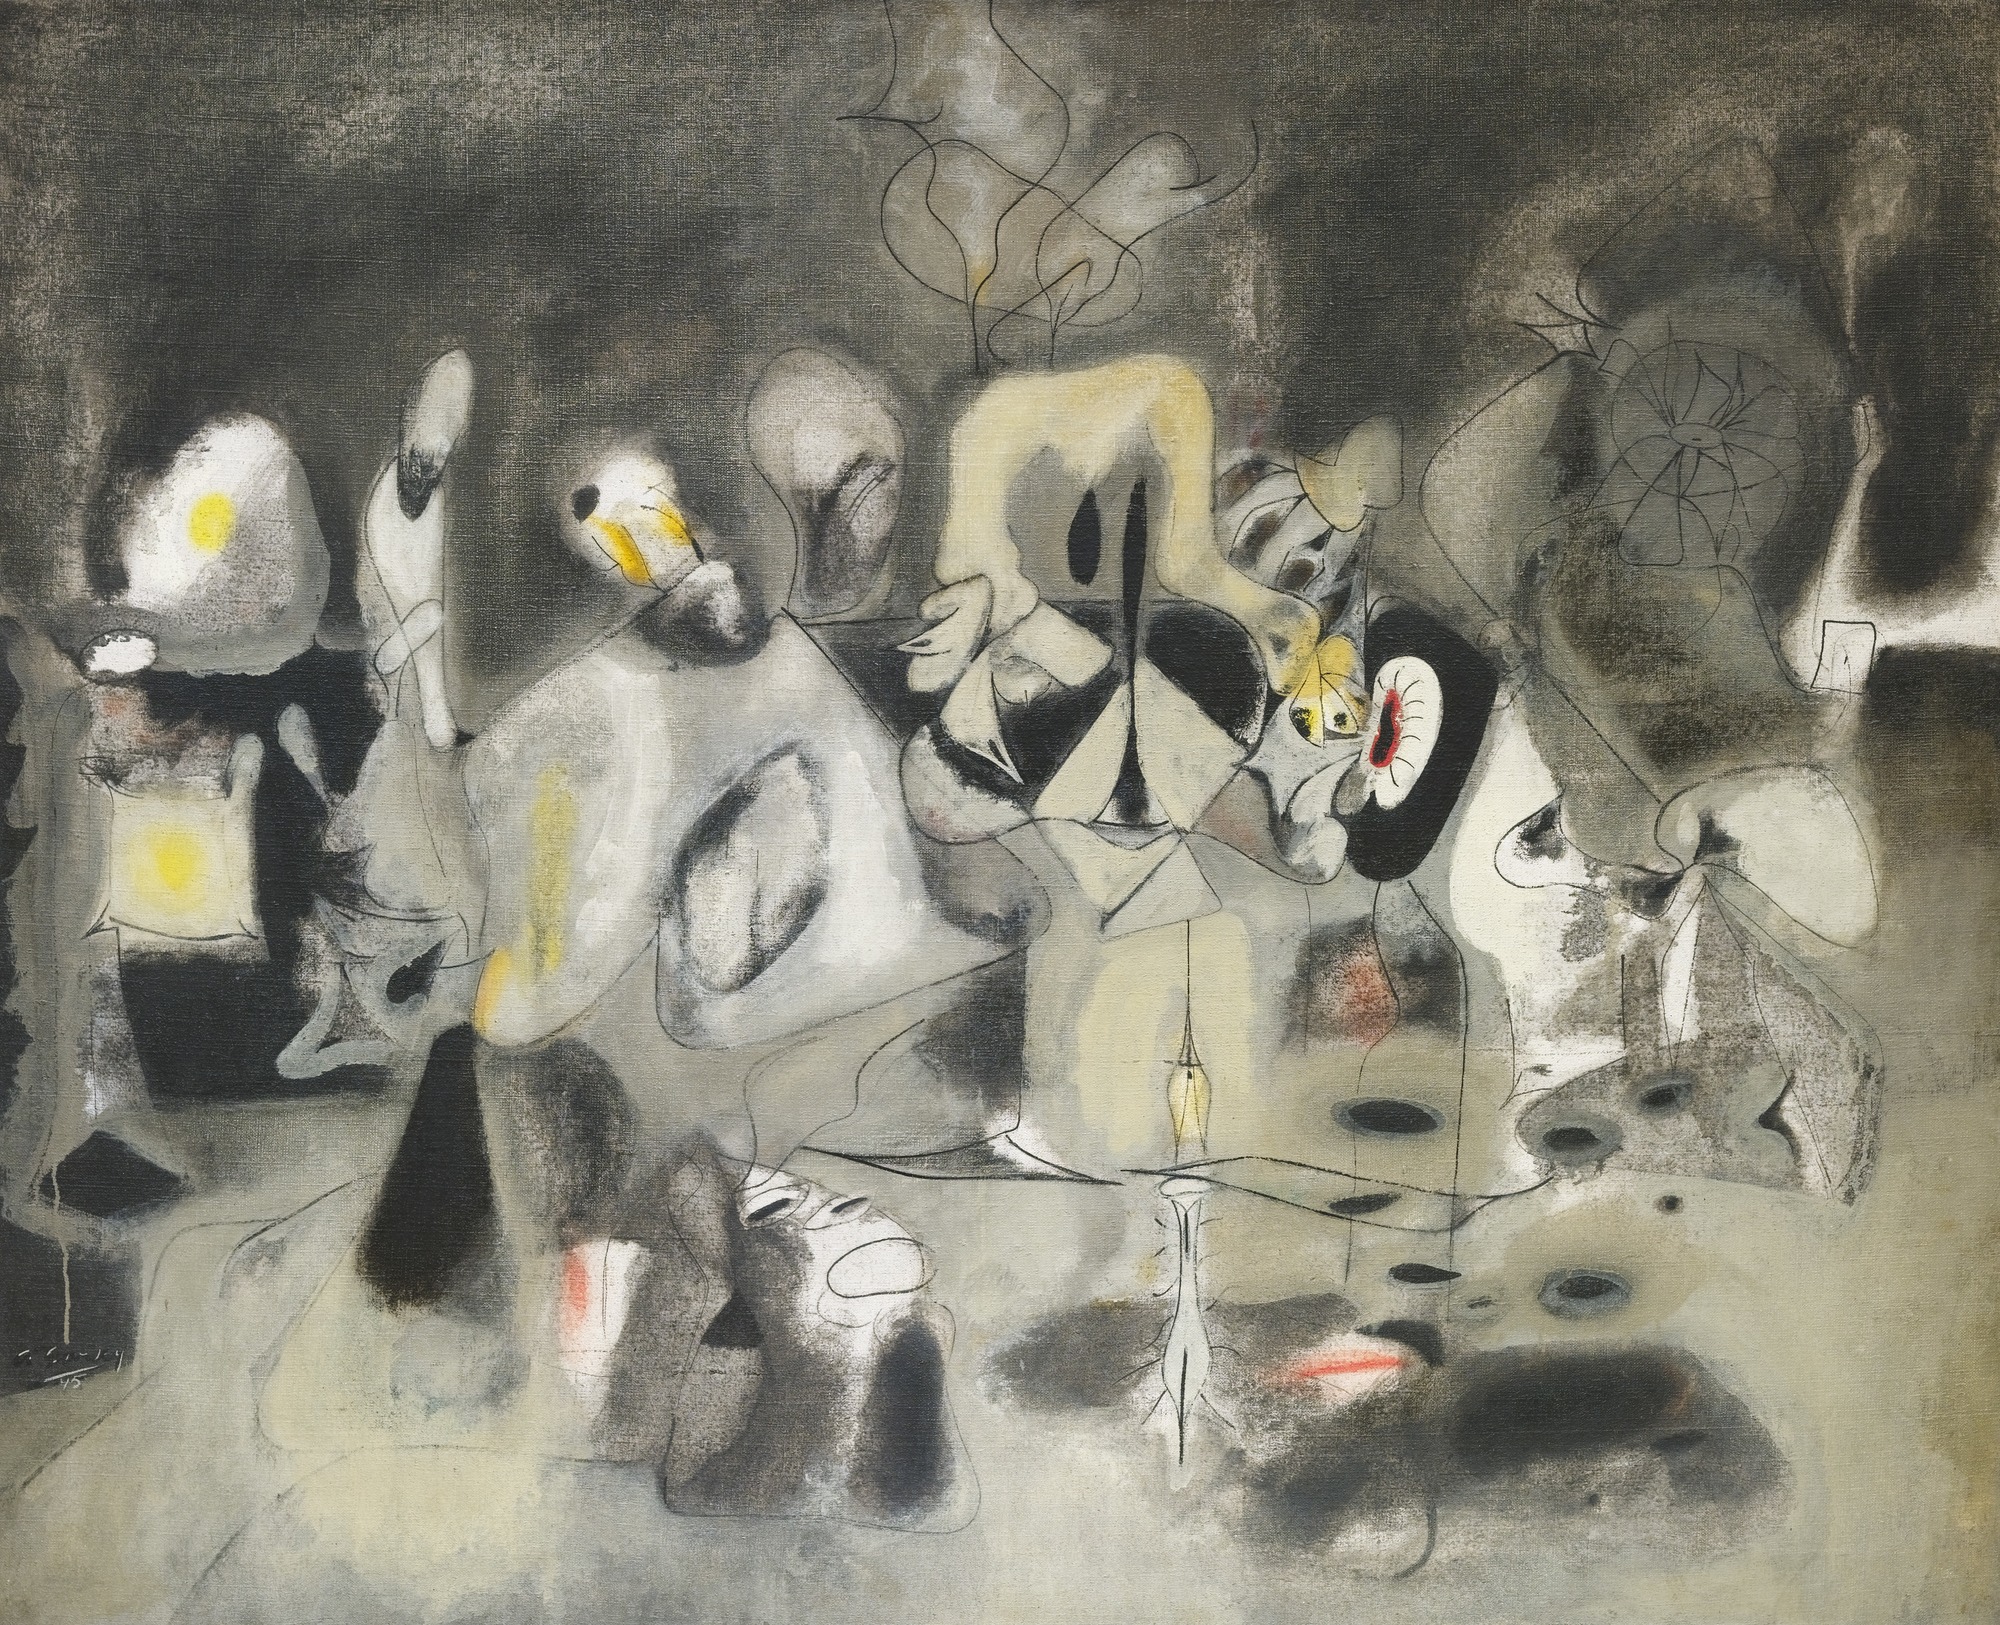 Diary of a Seducer by Arshile Gorky - 1945 - 126.7 x 157.5 cm Museum of Modern Art